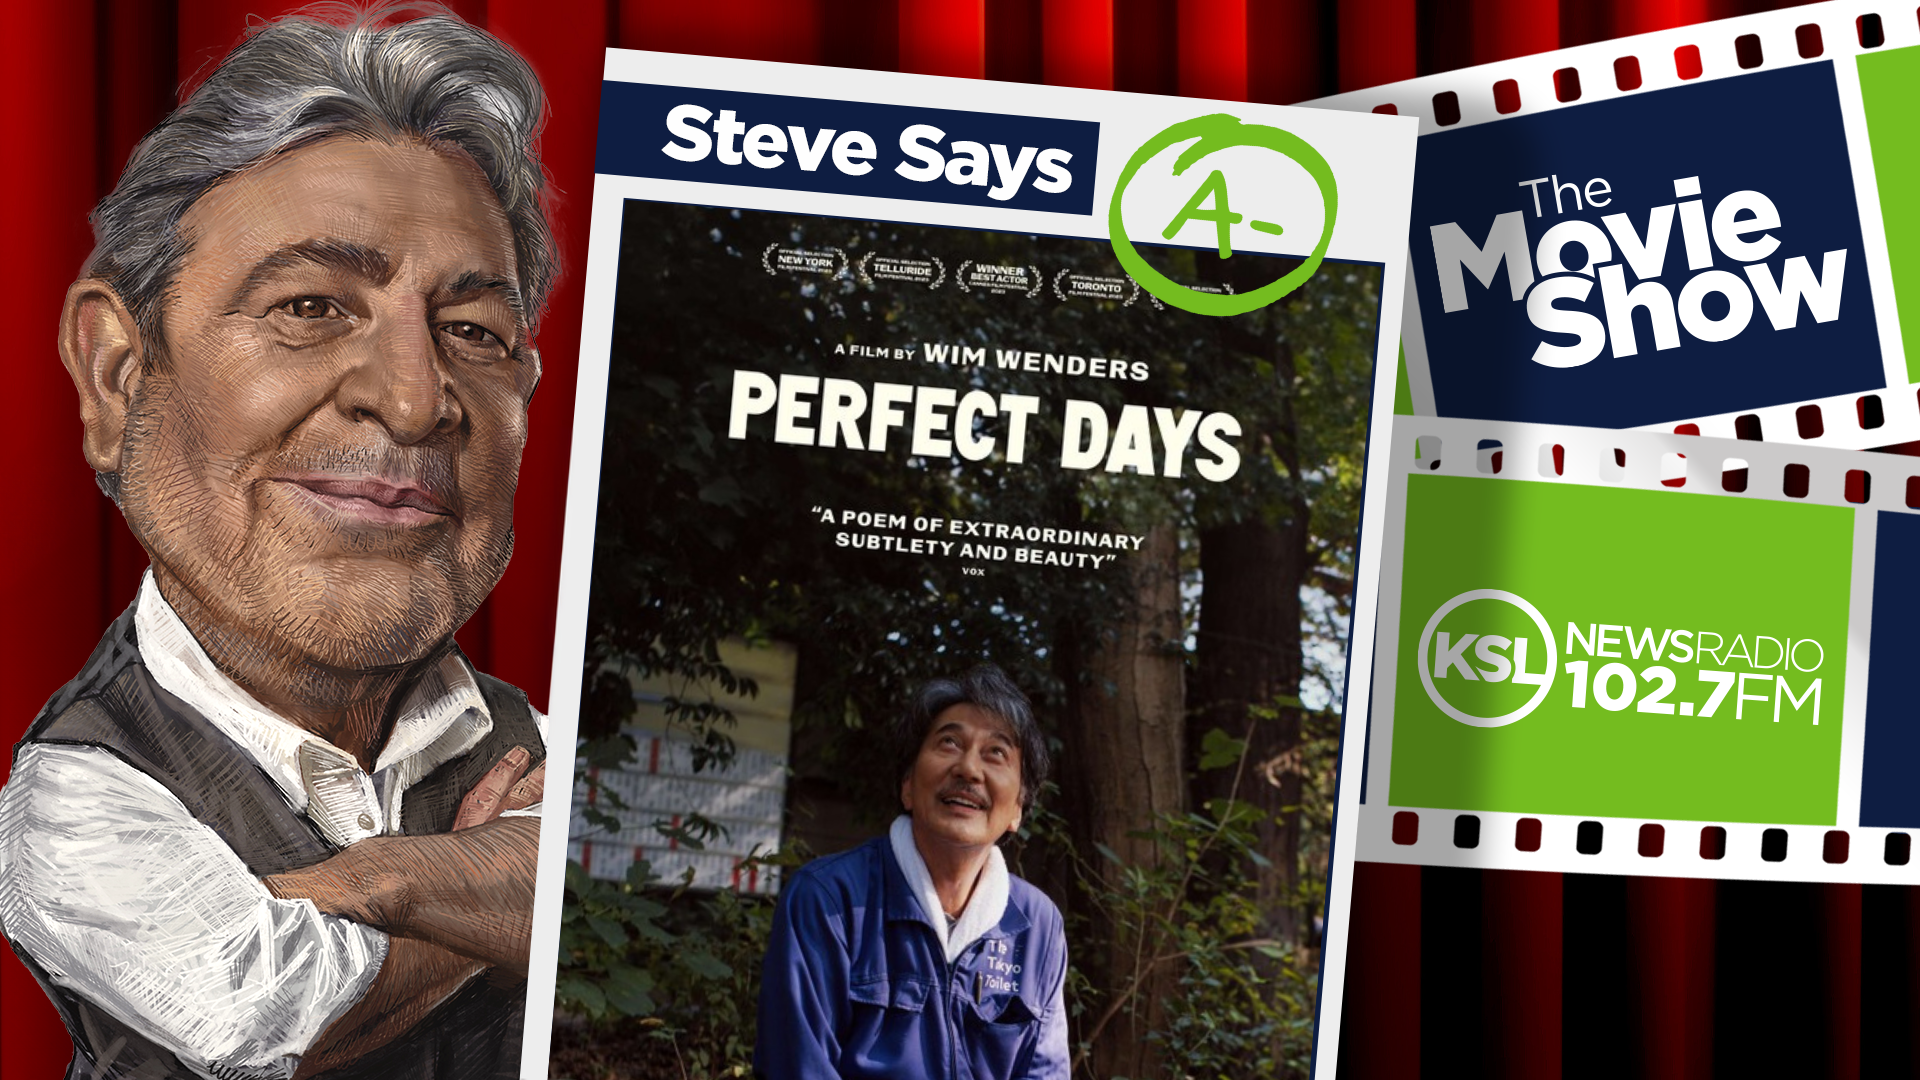 KSL Movie Show Review of "Perfect Days." This is one of those “art house films” that mainstream...